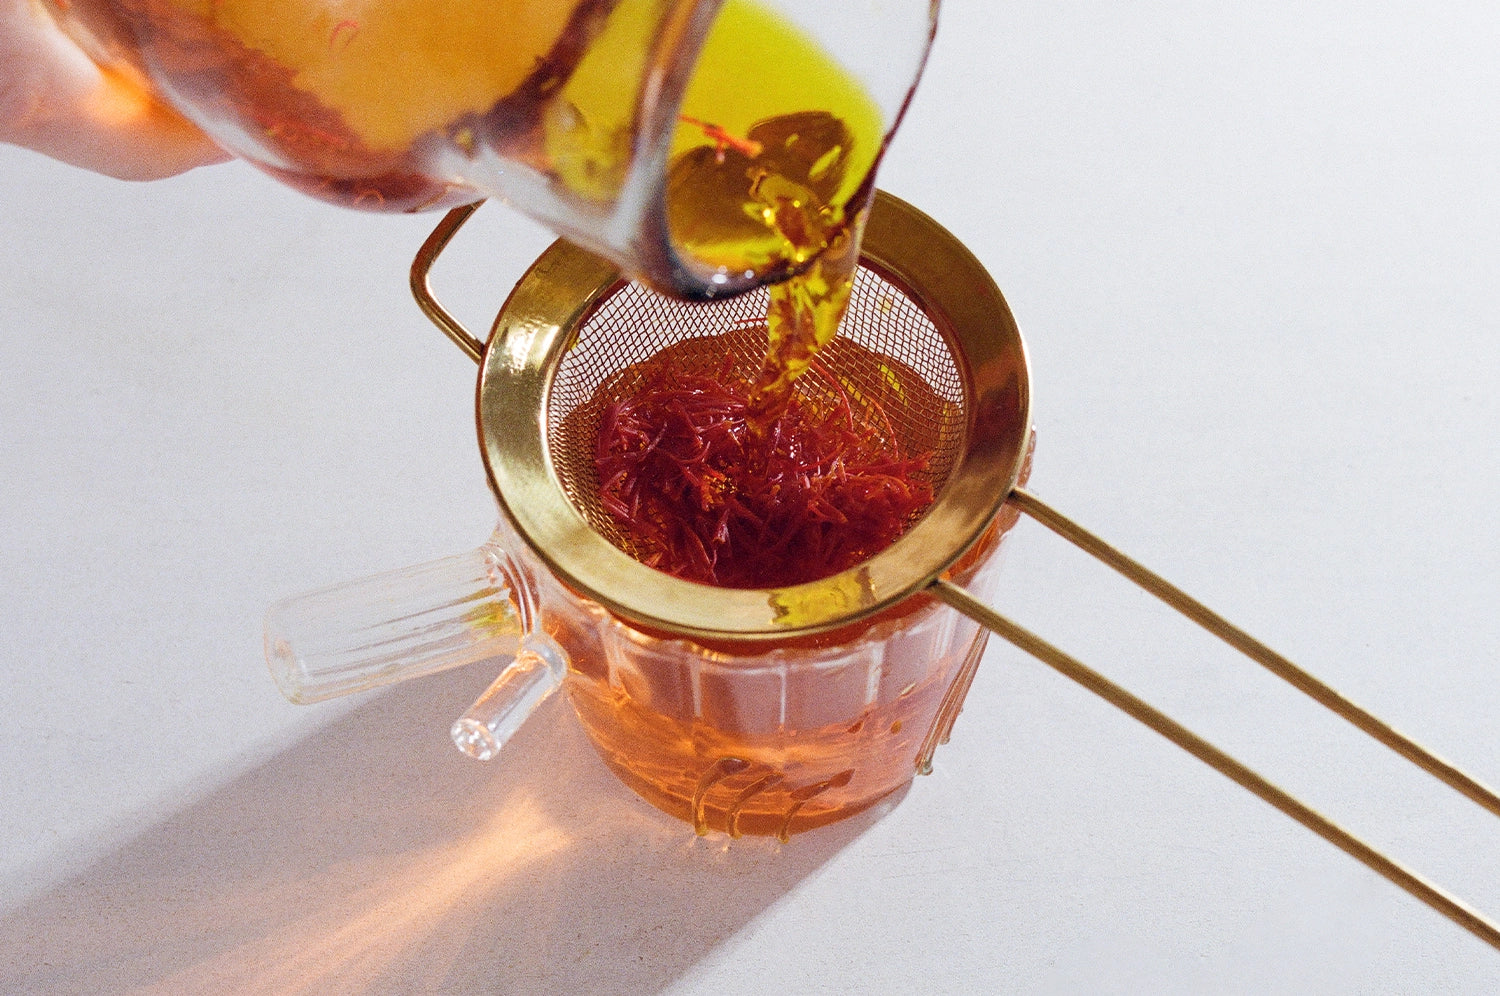 An overhead view of a model pouring The Fullest's saffron tea into a glass using a brass strainer.